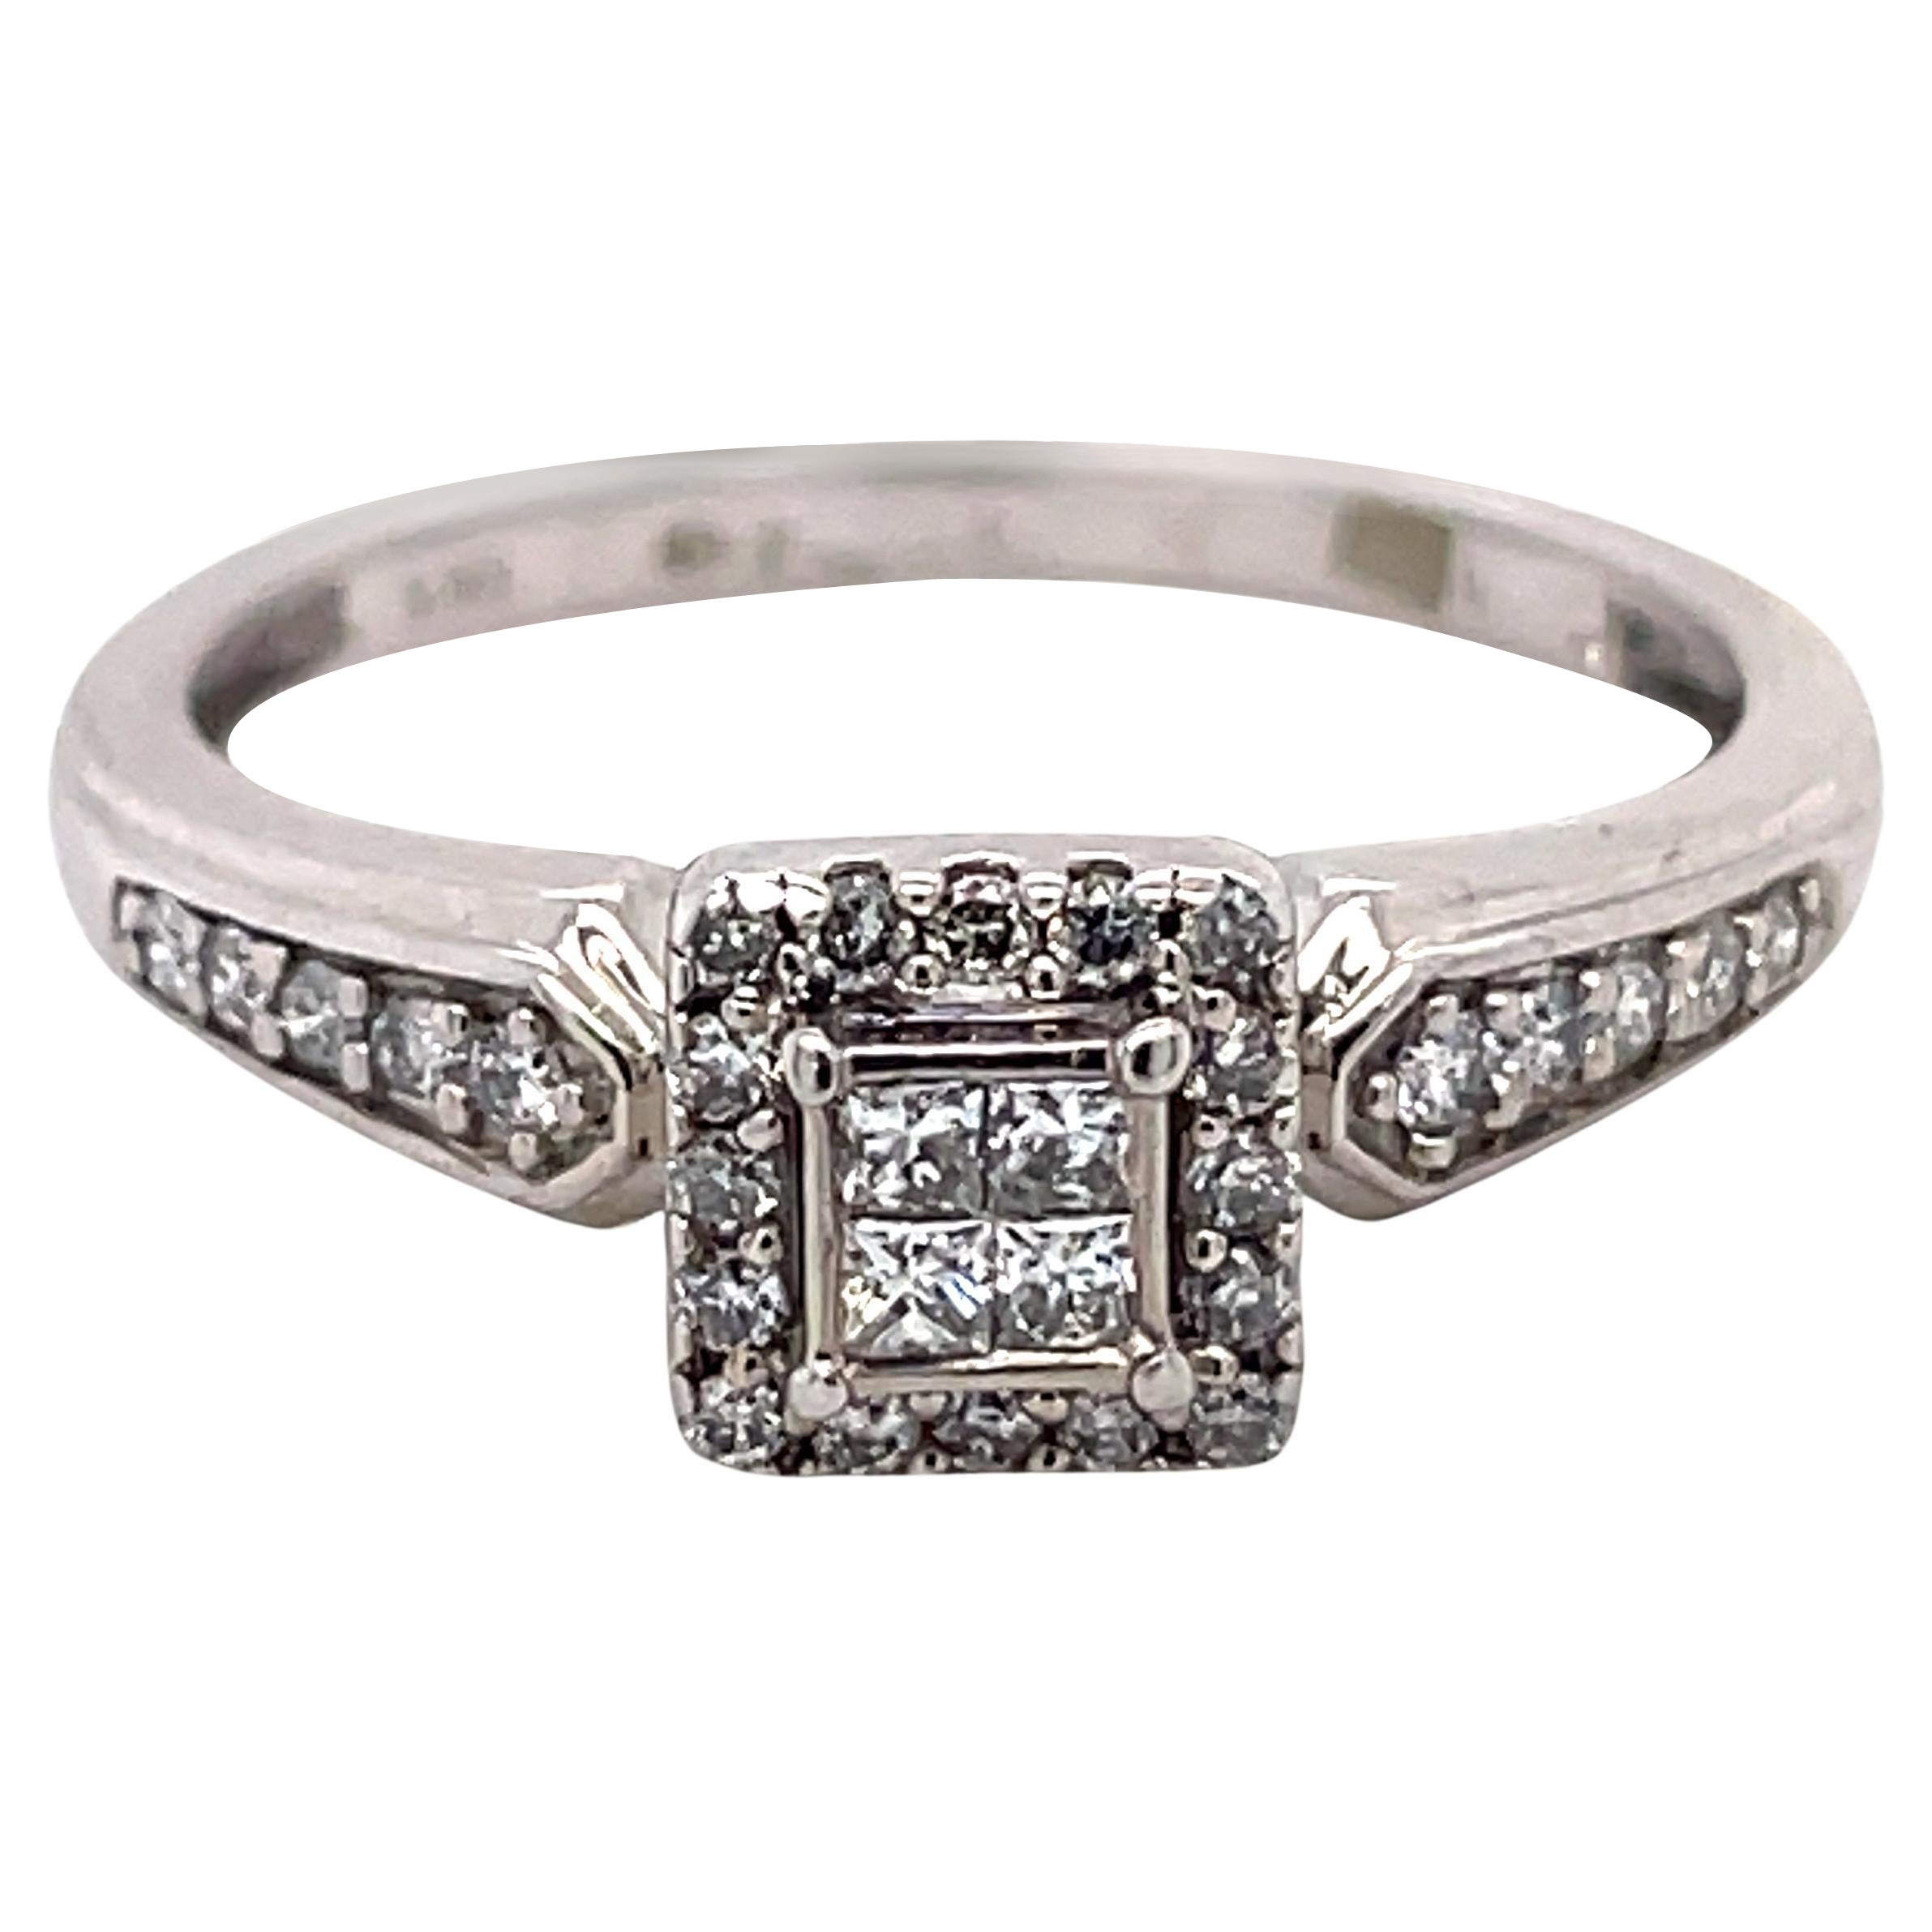 Vintage princess cut ring, dainty ring, 10K, 0.17ct diamonds, gold promise ring For Sale